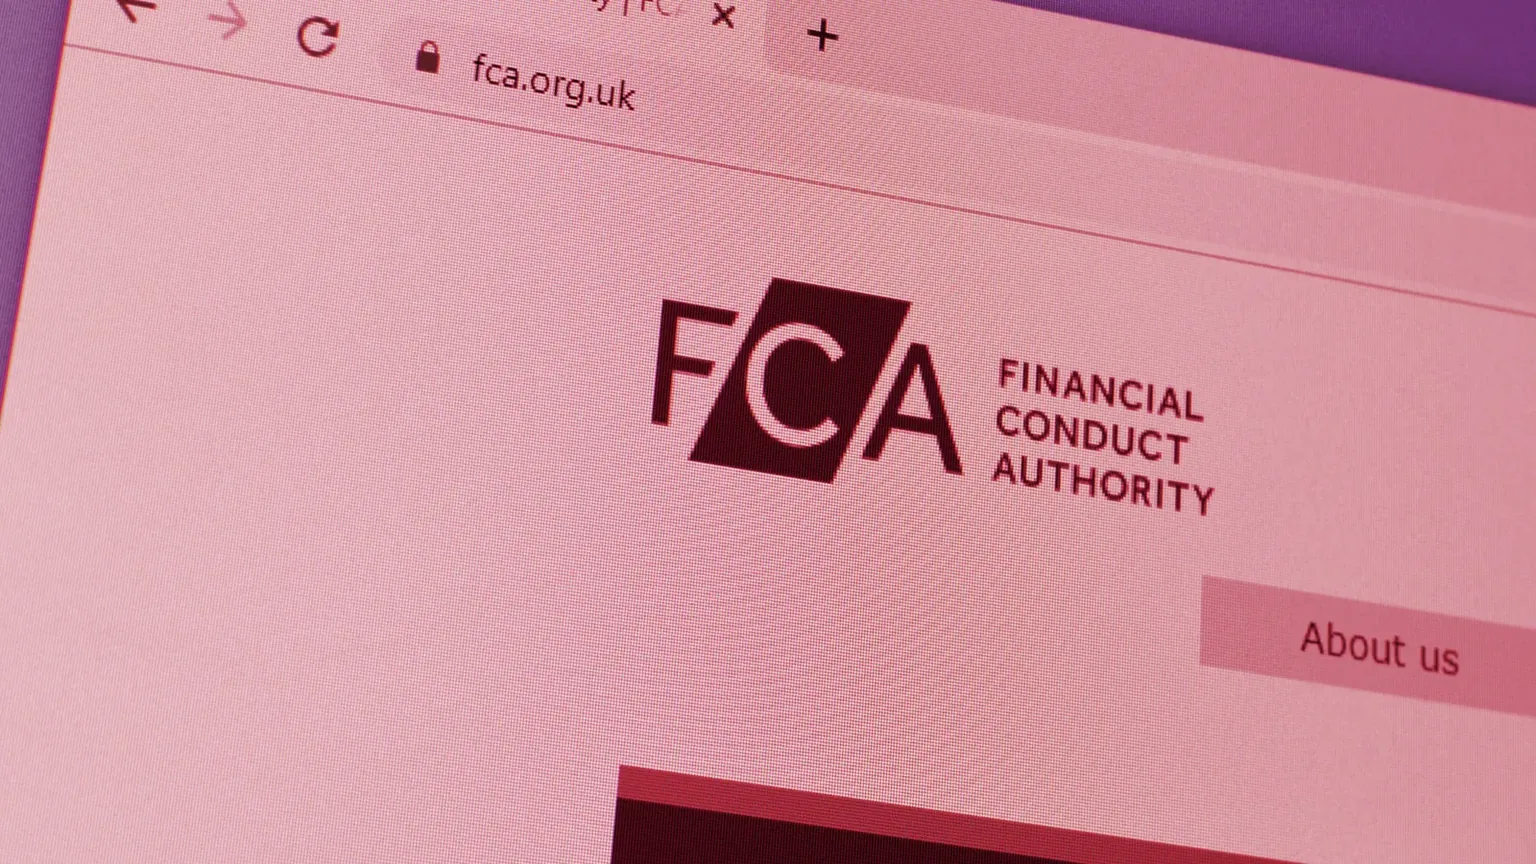 The Financial Conduct Authority (FCA) is the UK's lead financial regulator. Image: Shutterstock 